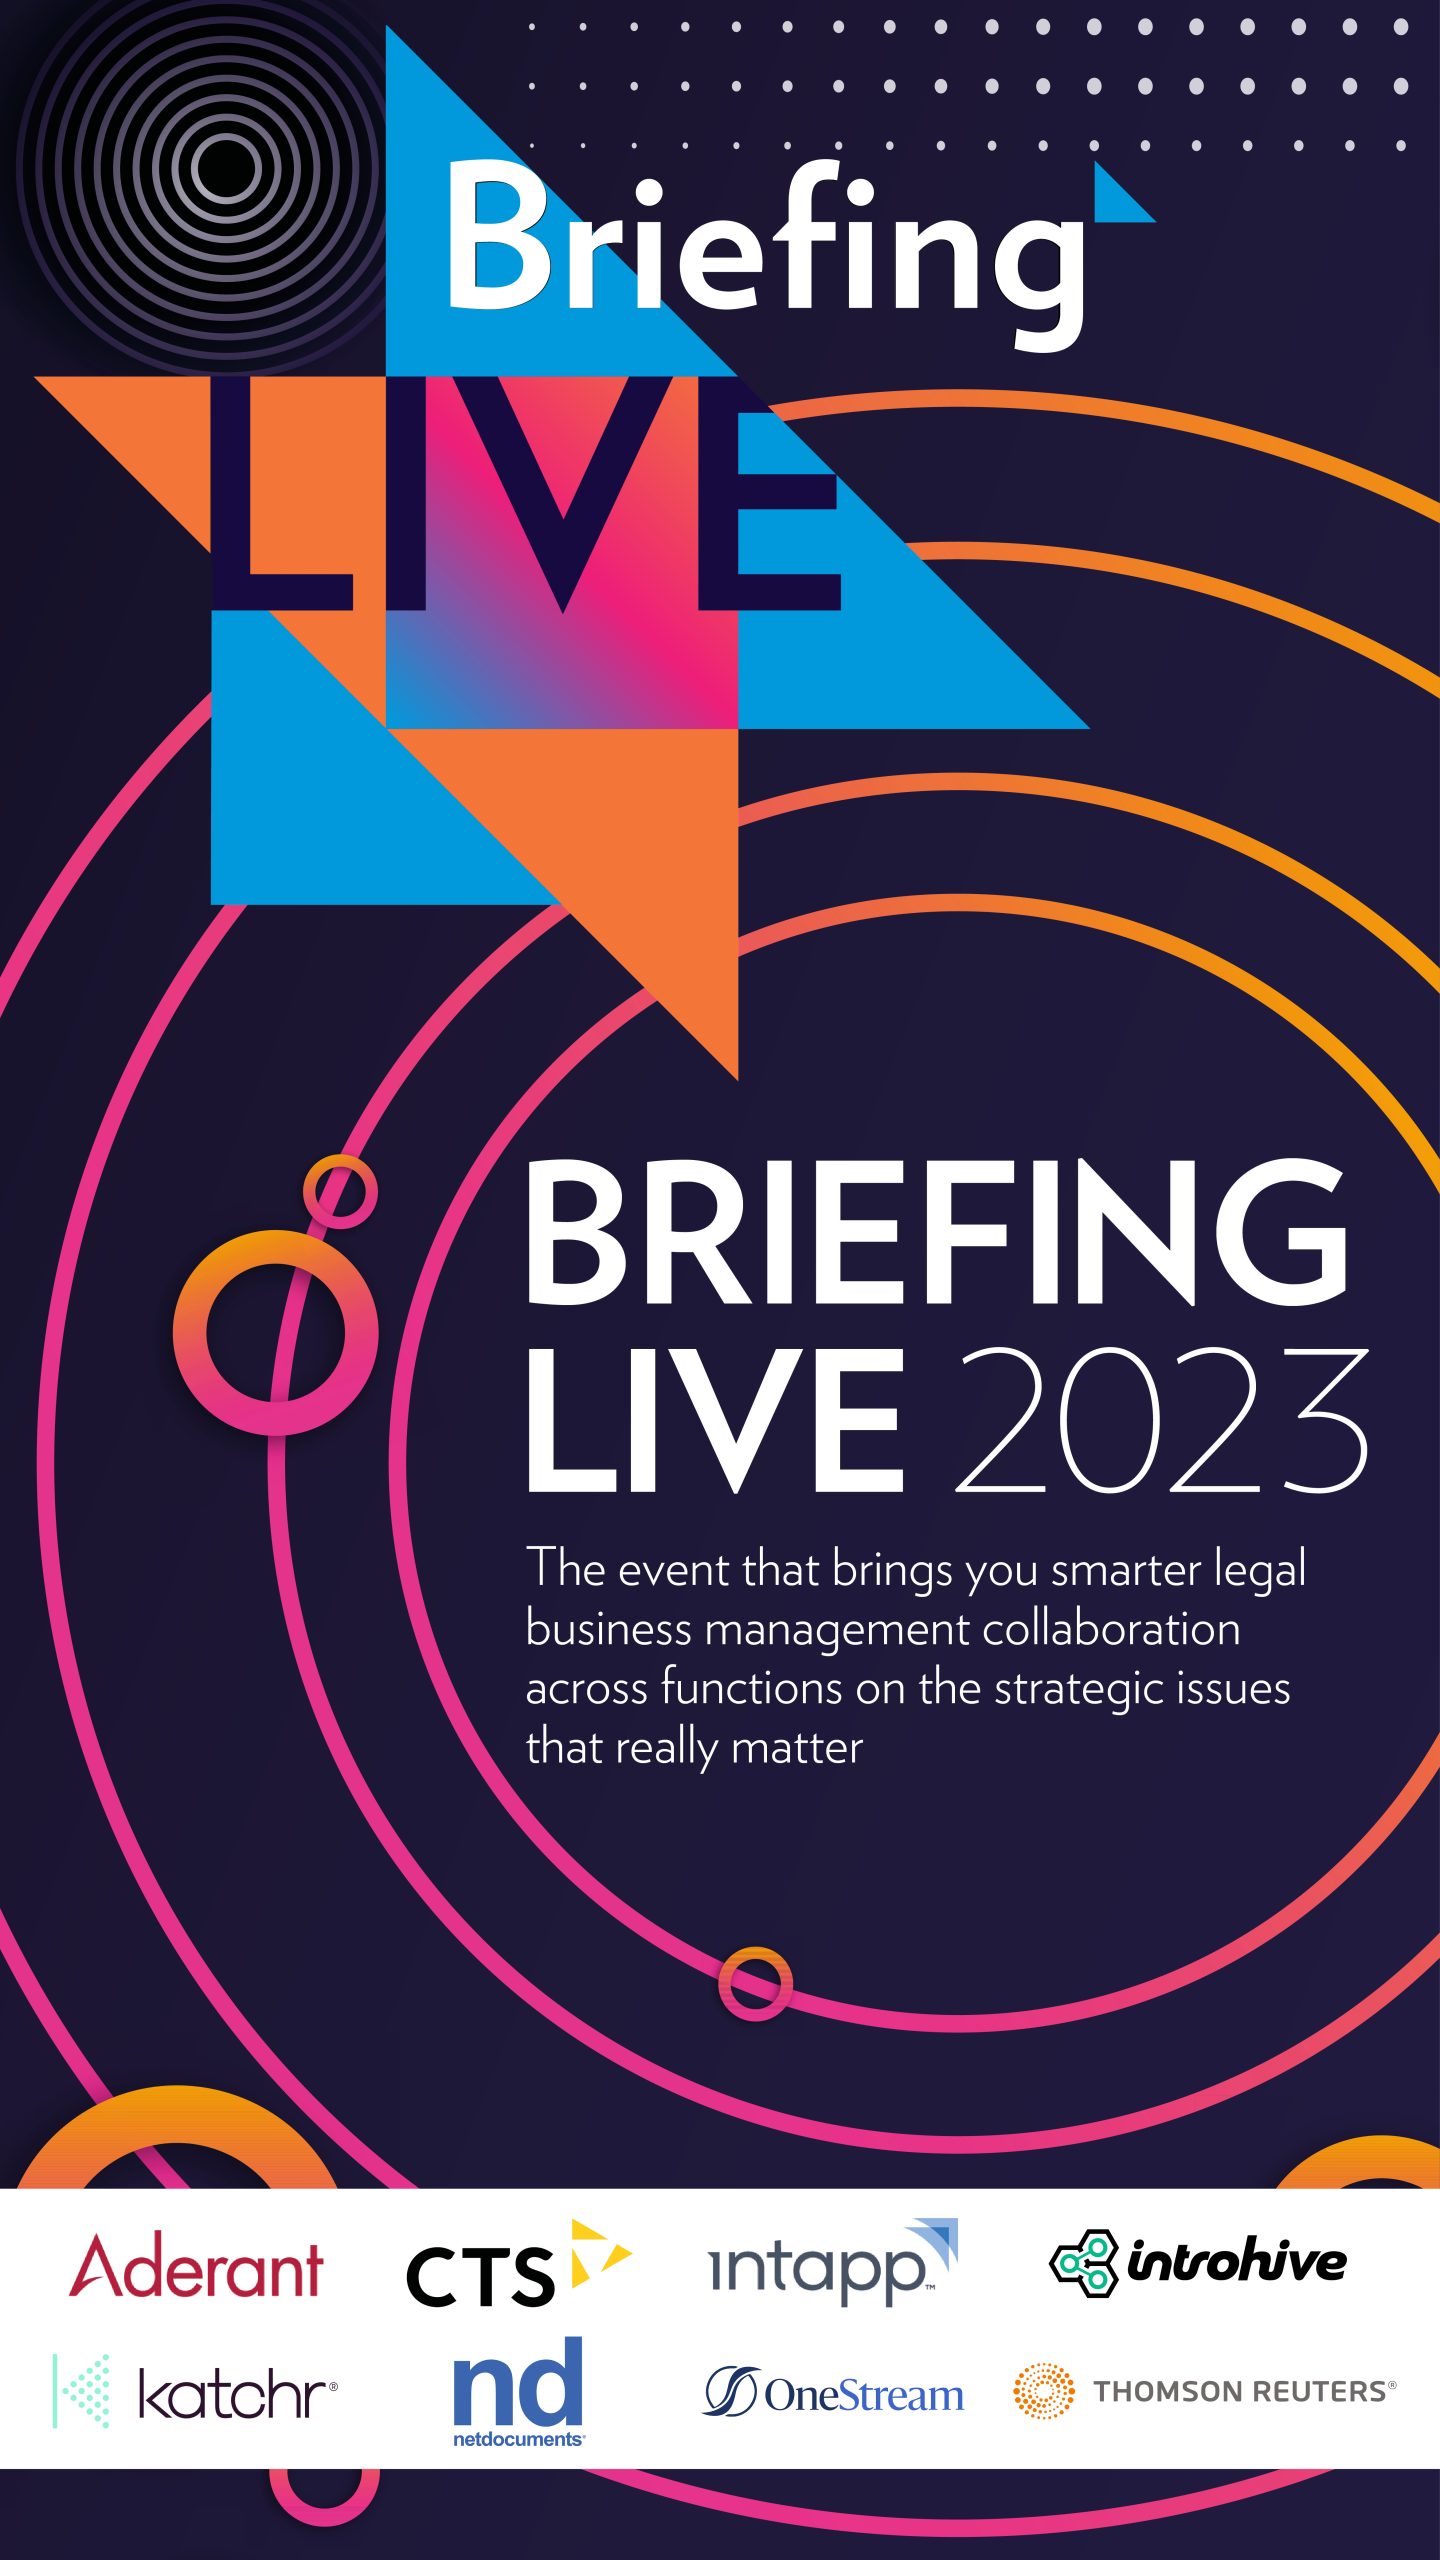 Briefing LIVE 2023